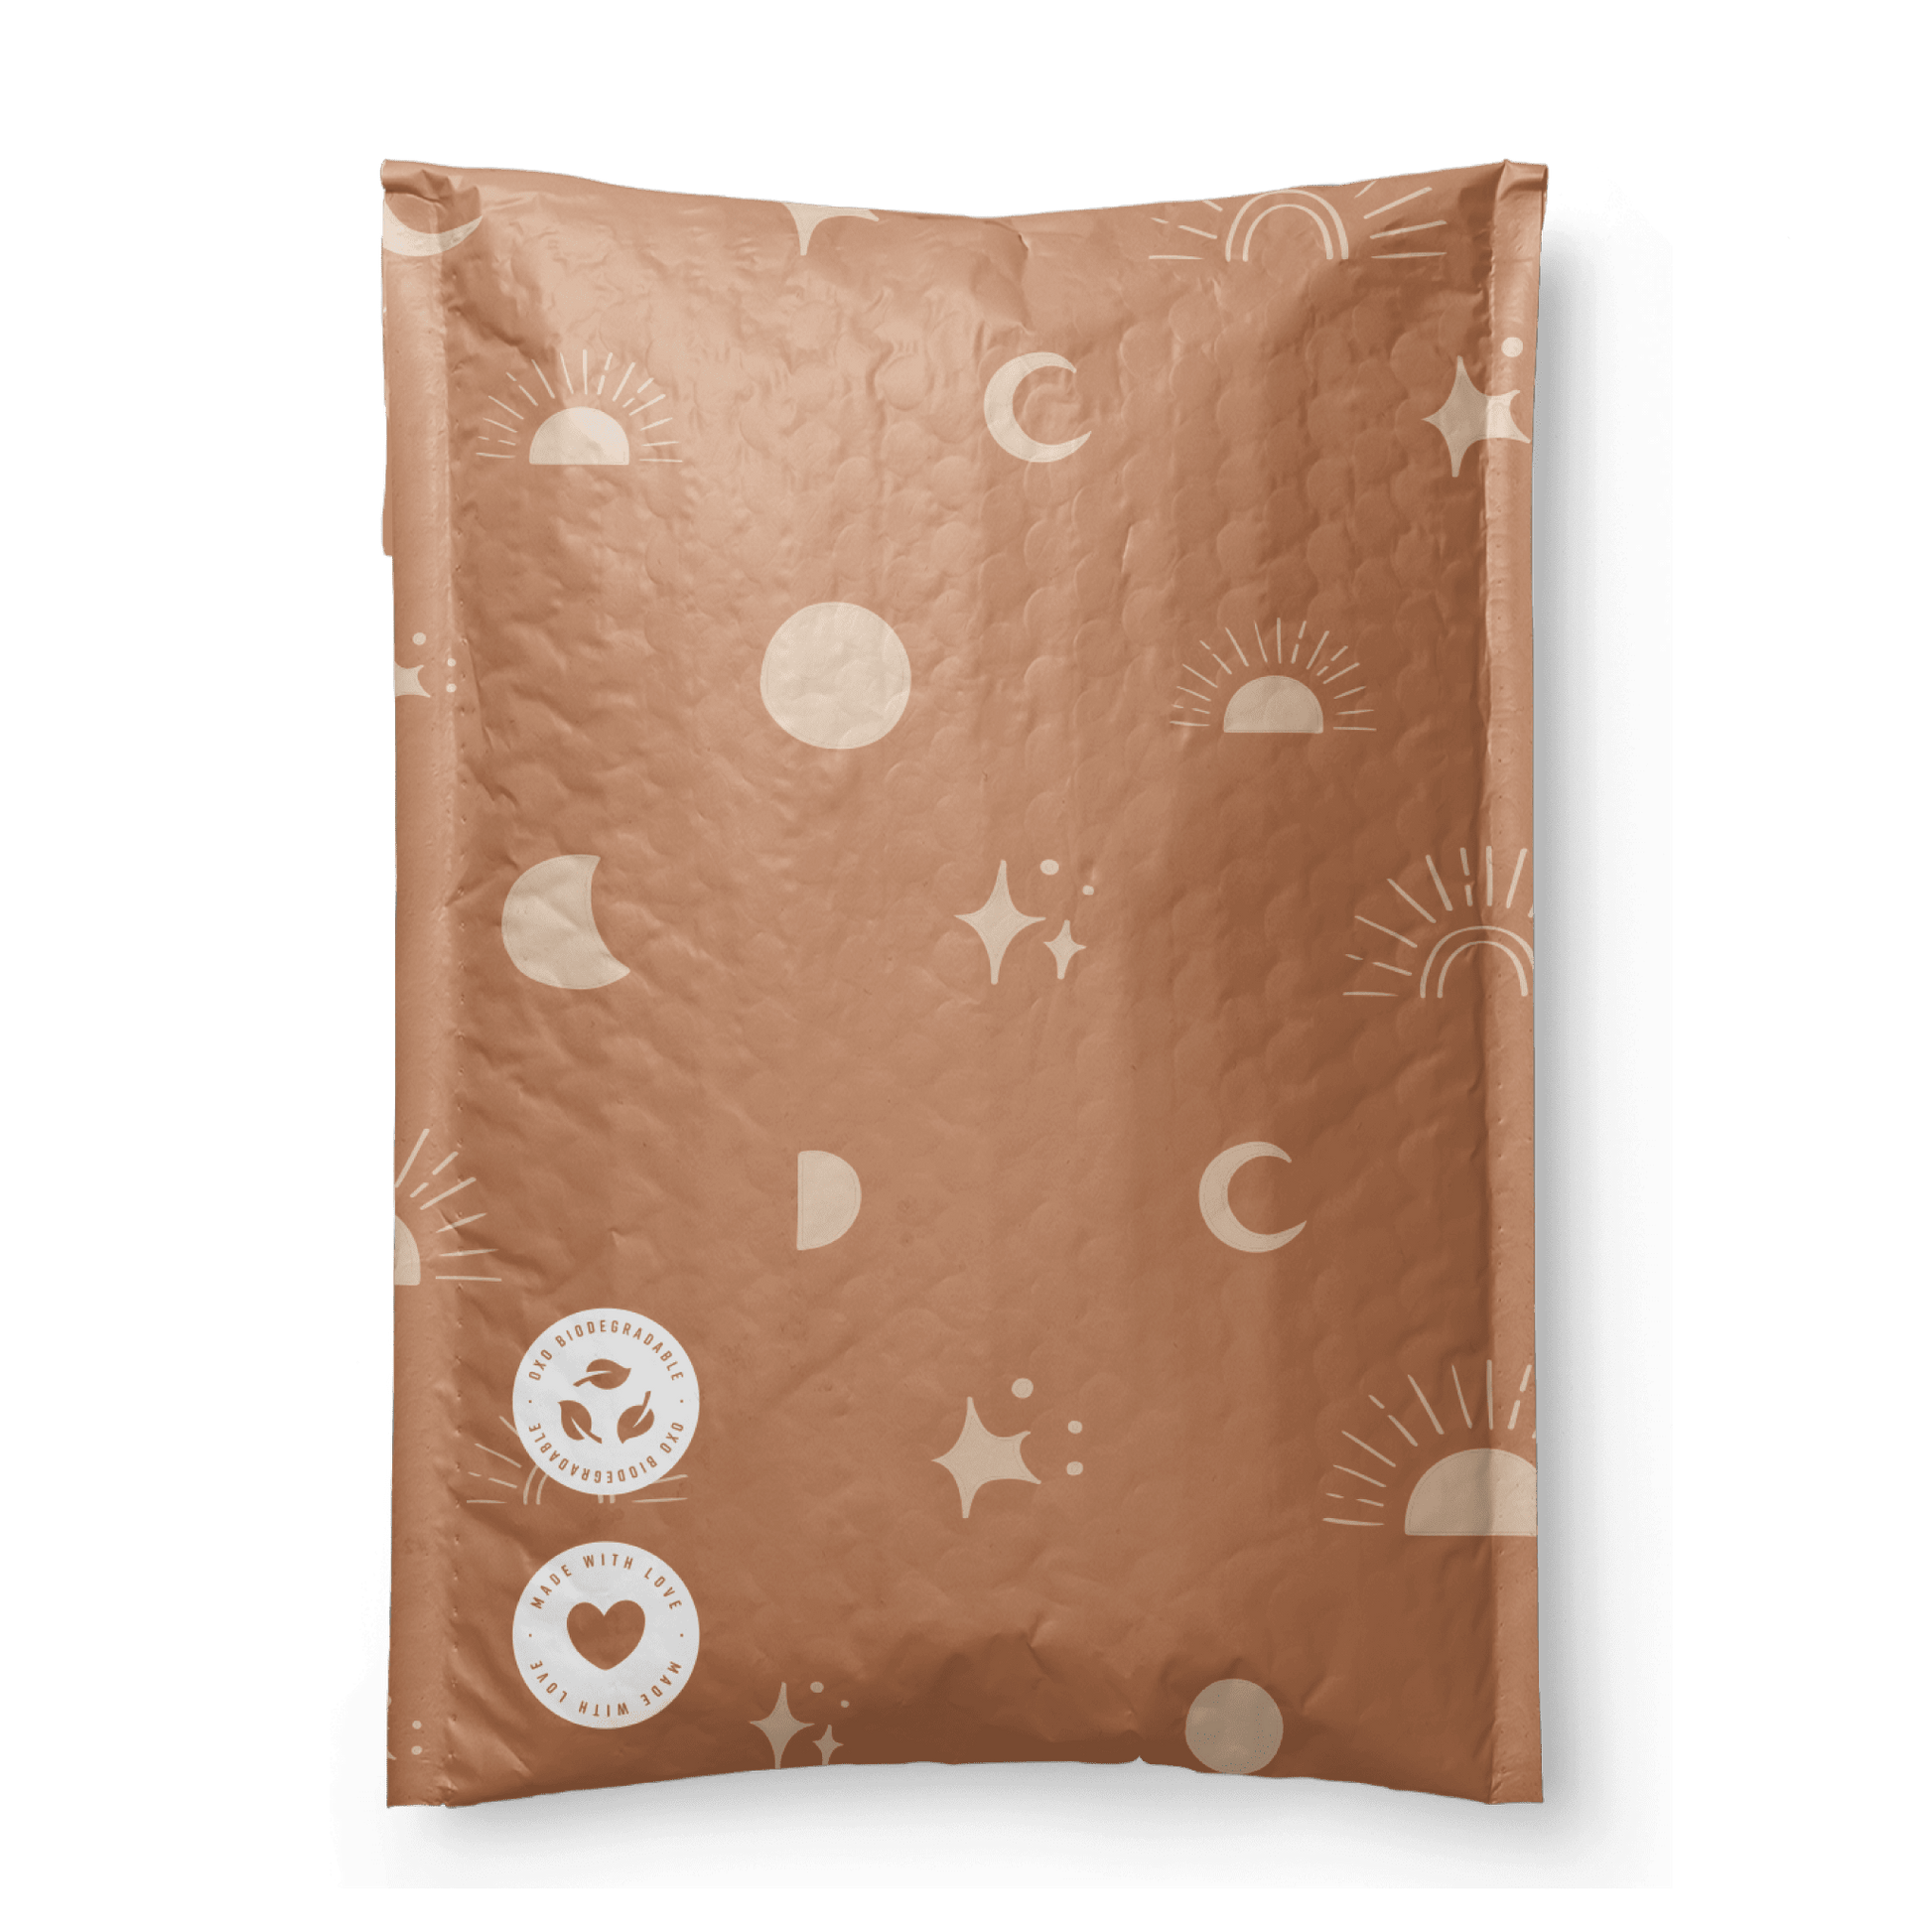 A patterned brown blanket or throw with Celestial Tan Biodegradable Bubble Mailers 8.5" x 12" designs folded on a dark, recycle-friendly surface by impack.co.